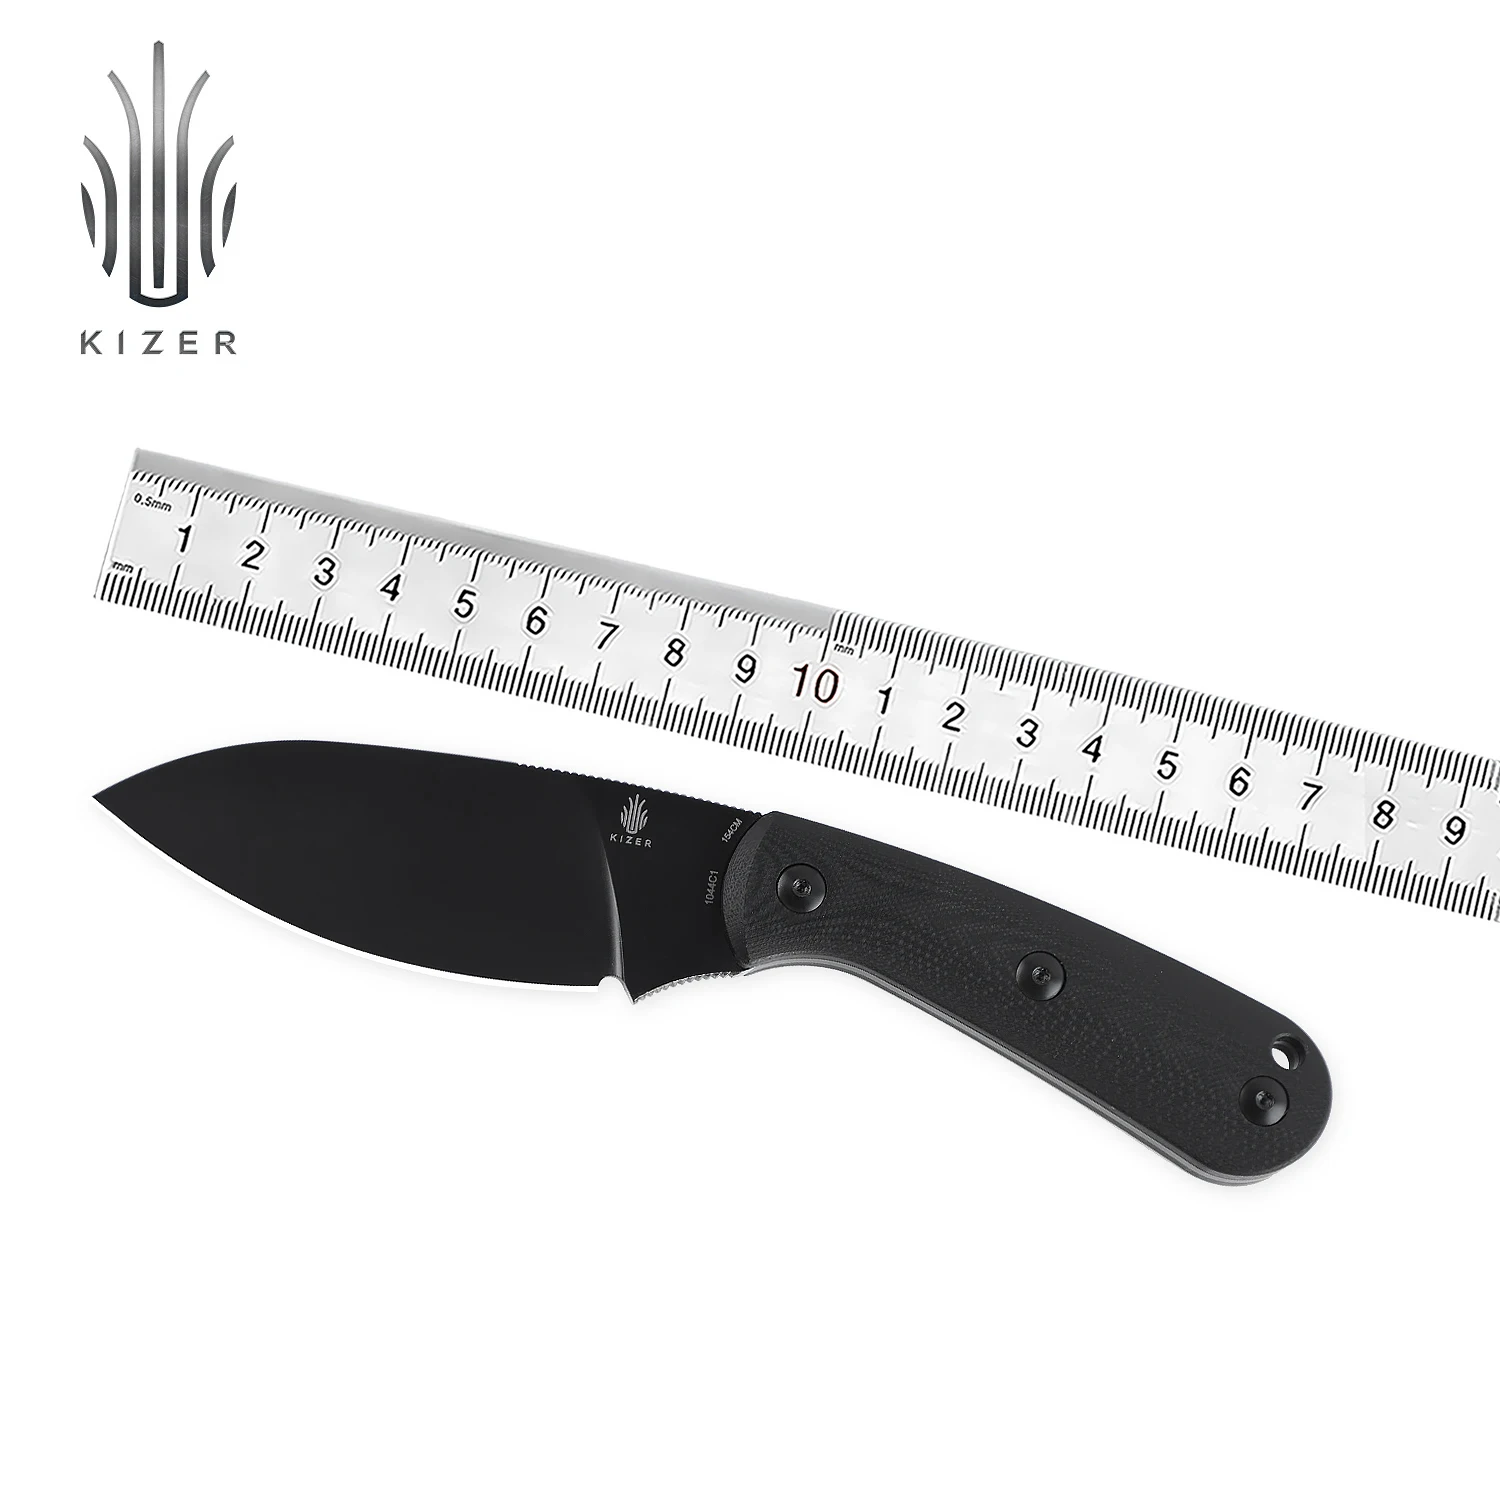 Kizer Fixed Blade Knife Baby 1044C1 Outdoor Survival Knife G10 Handle 154CM Durable Steel Black Hunting Survival Tool